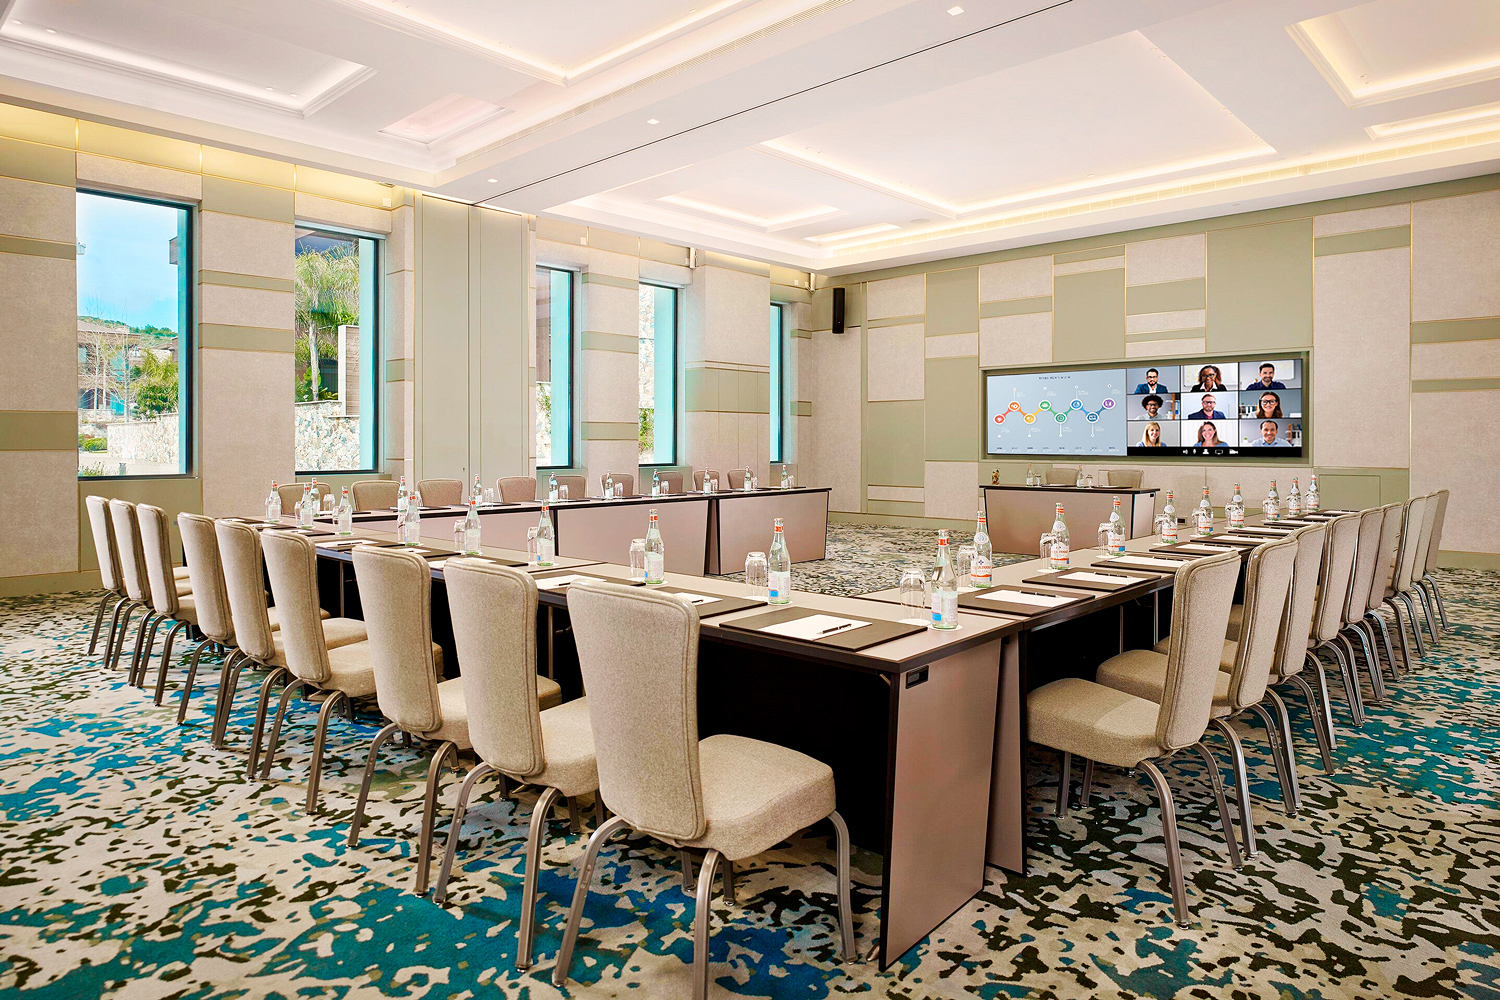 Meeting Room, in Classroom/Training Room layout, at Parklane Resort and Spa